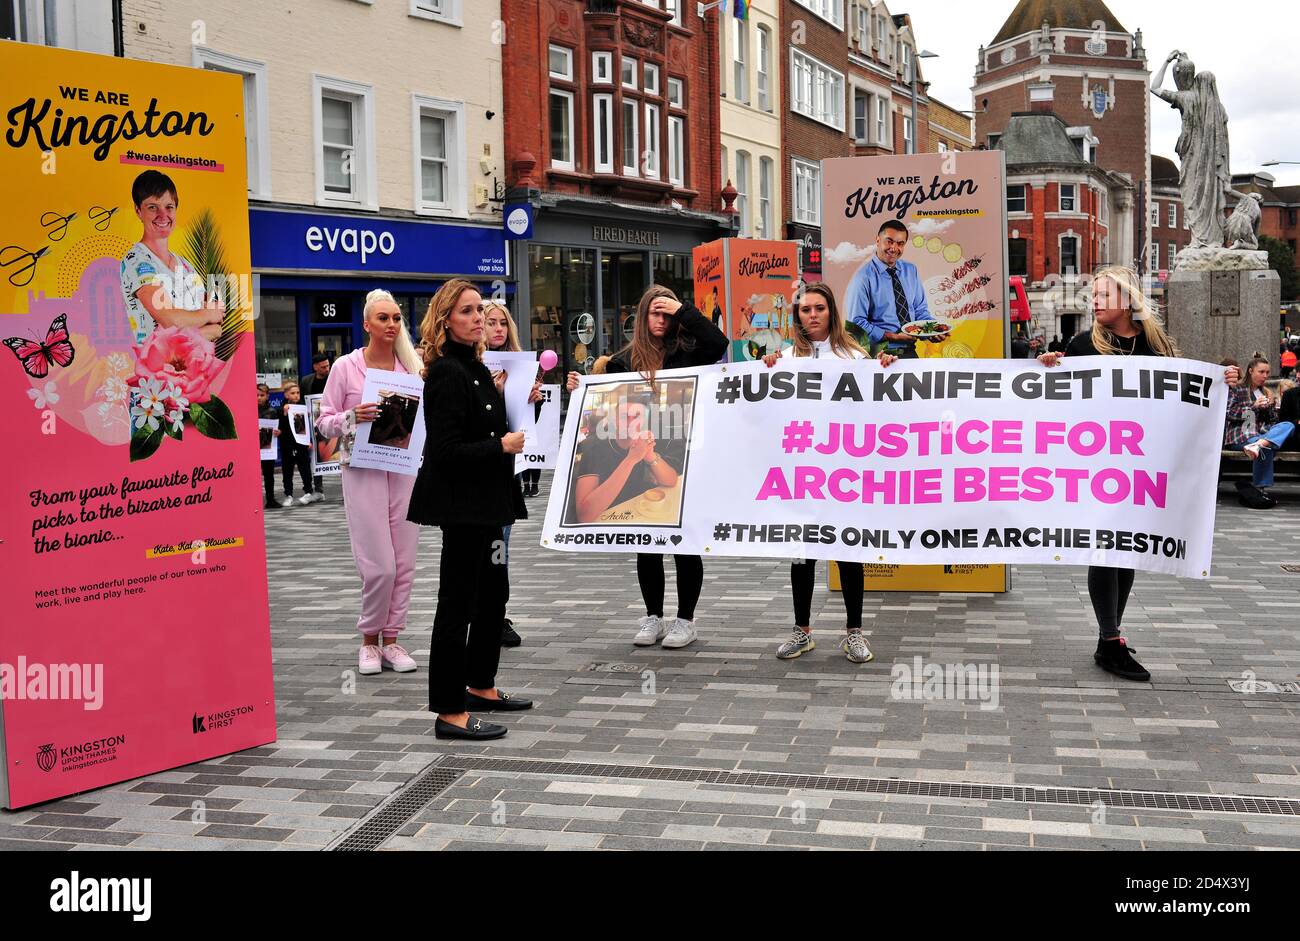 After a manslaughter verdict is reached the friends and family of knife crime victim, Archie Beston, gather at the site of his death in Kingston upon Thames to demand a harsher sentence for the loss of Archie. https:/yellowdoorphotos.com/ Andrew Gulland Stock Photo